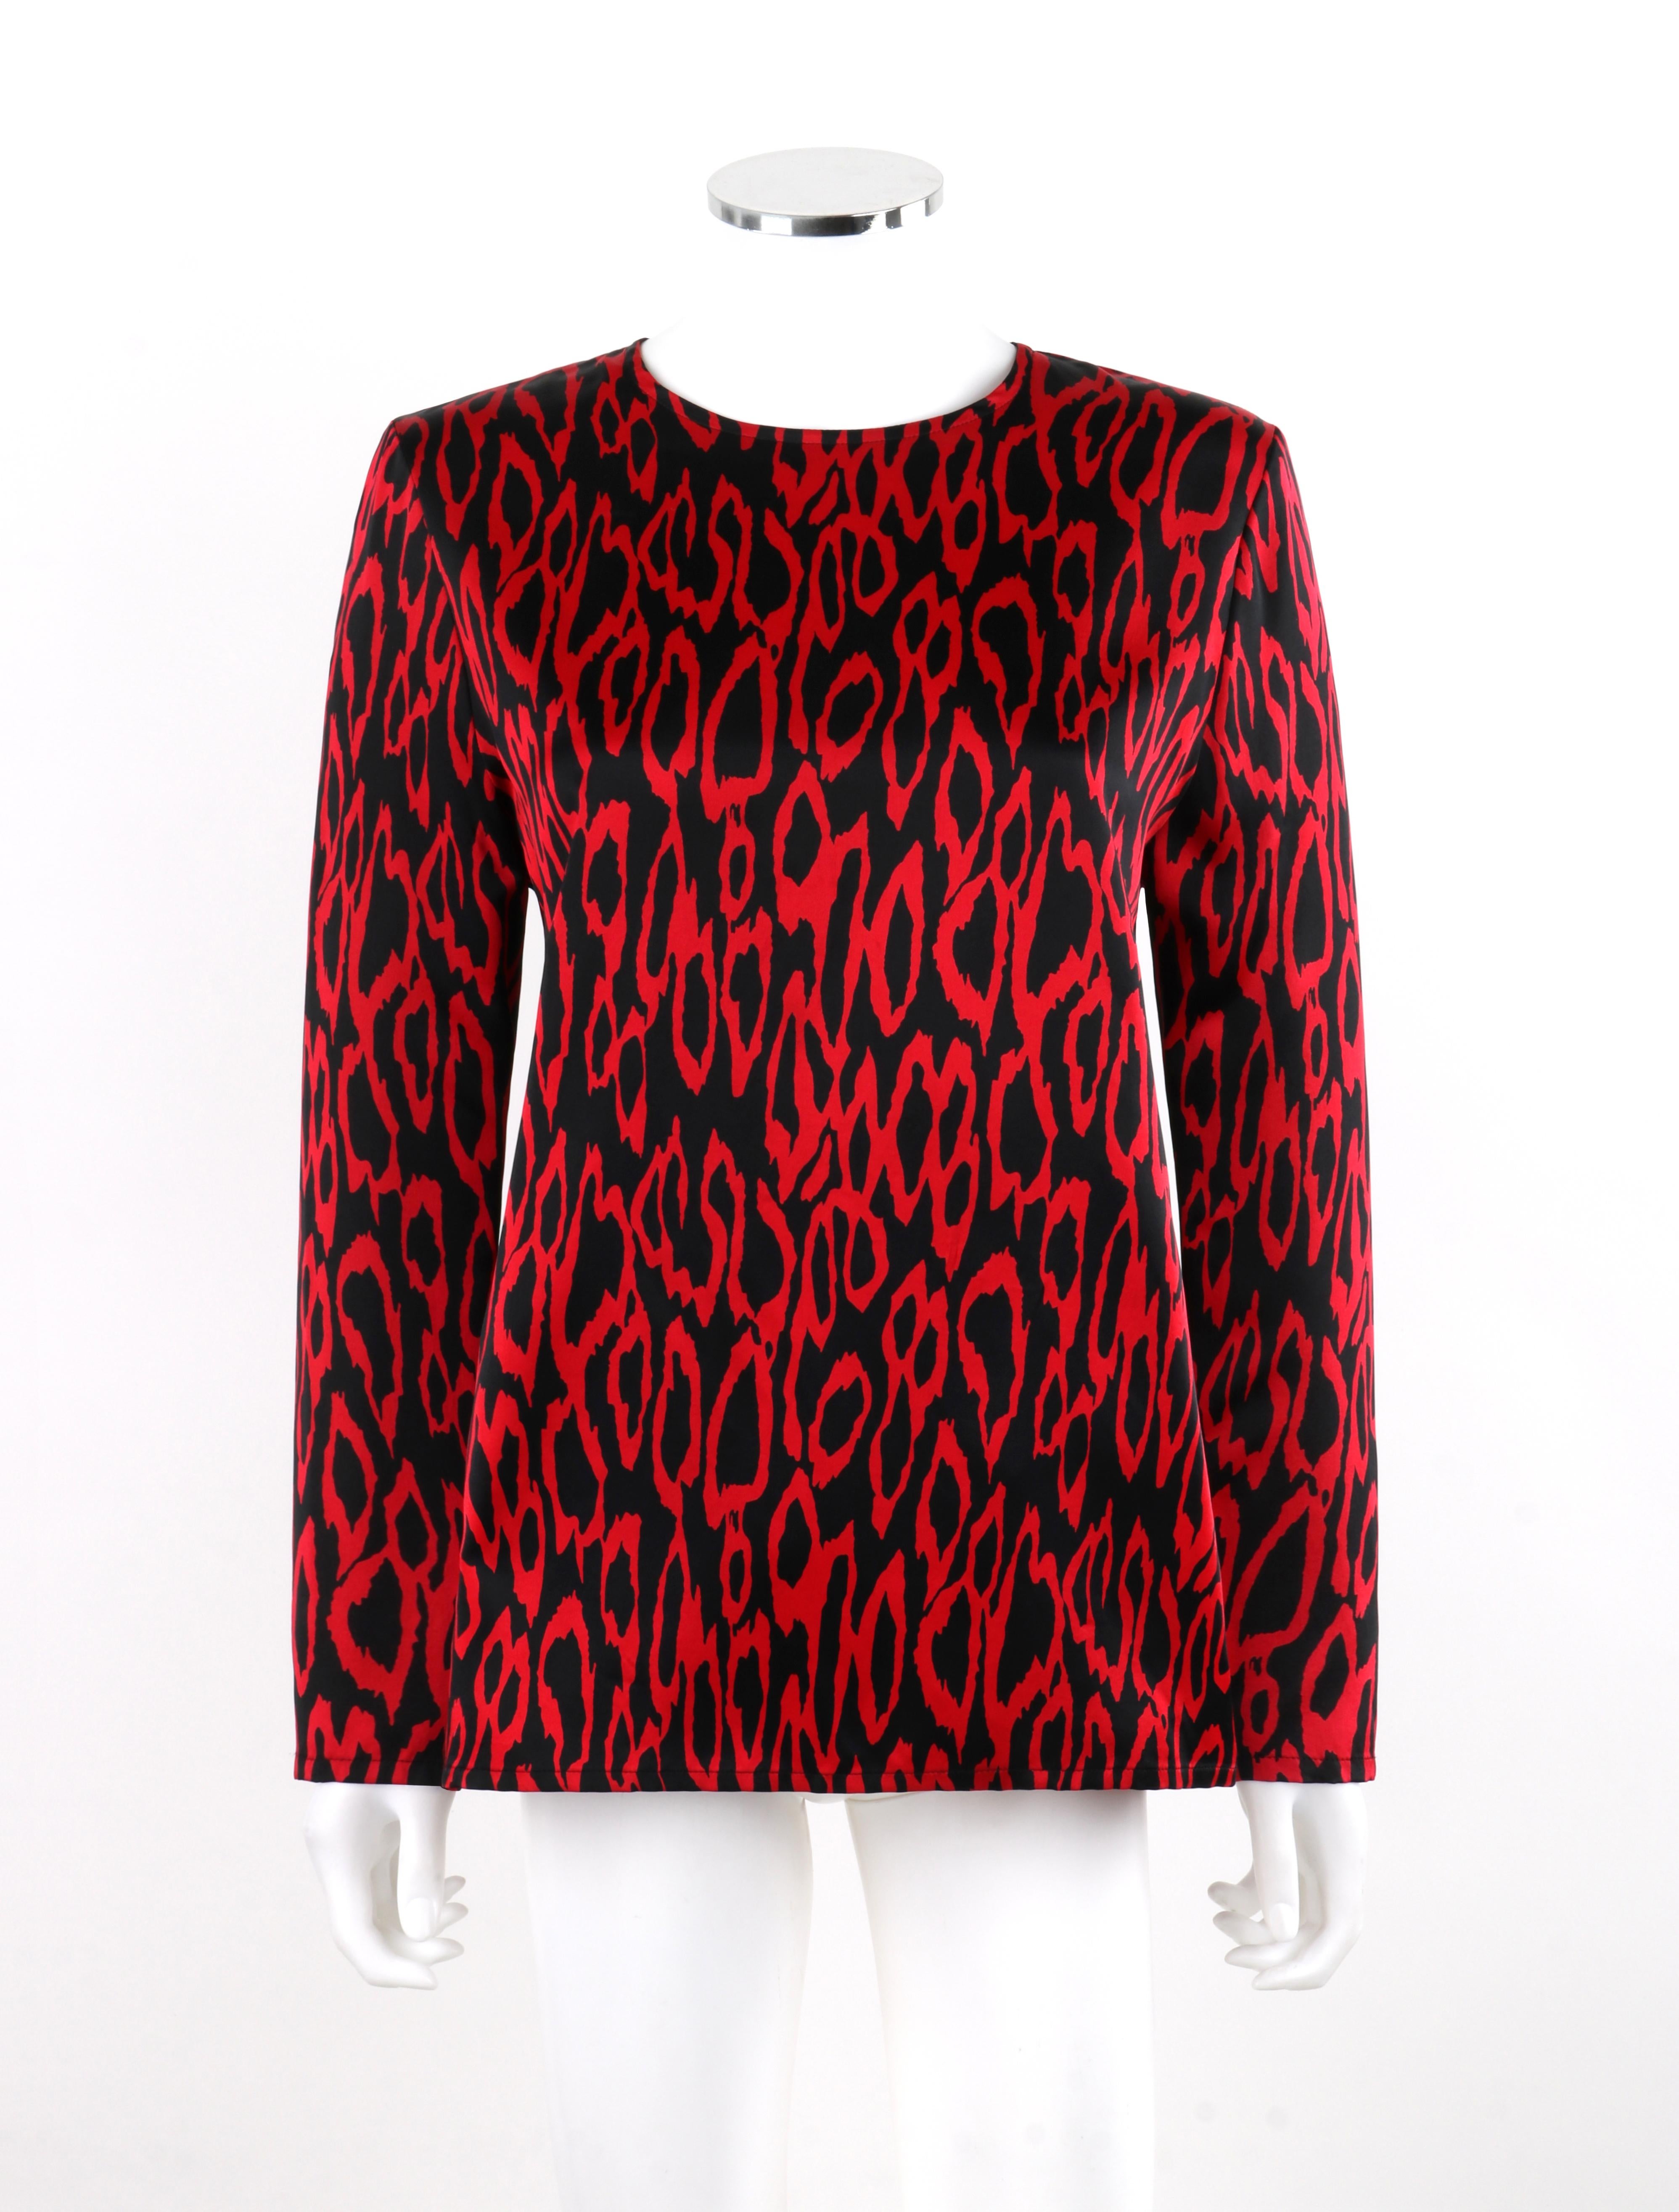 GIVENCHY Boutiques c.1980's Red Black Abstract Print Silk Long Sleeve Blouse Top

Brand / Manufacturer: Givenchy
Circa: 1980s
Designer: Givenchy
Style: Long sleeve blouse
Color(s): Shades of red, black
Lined: No
Marked Fabric Content: 